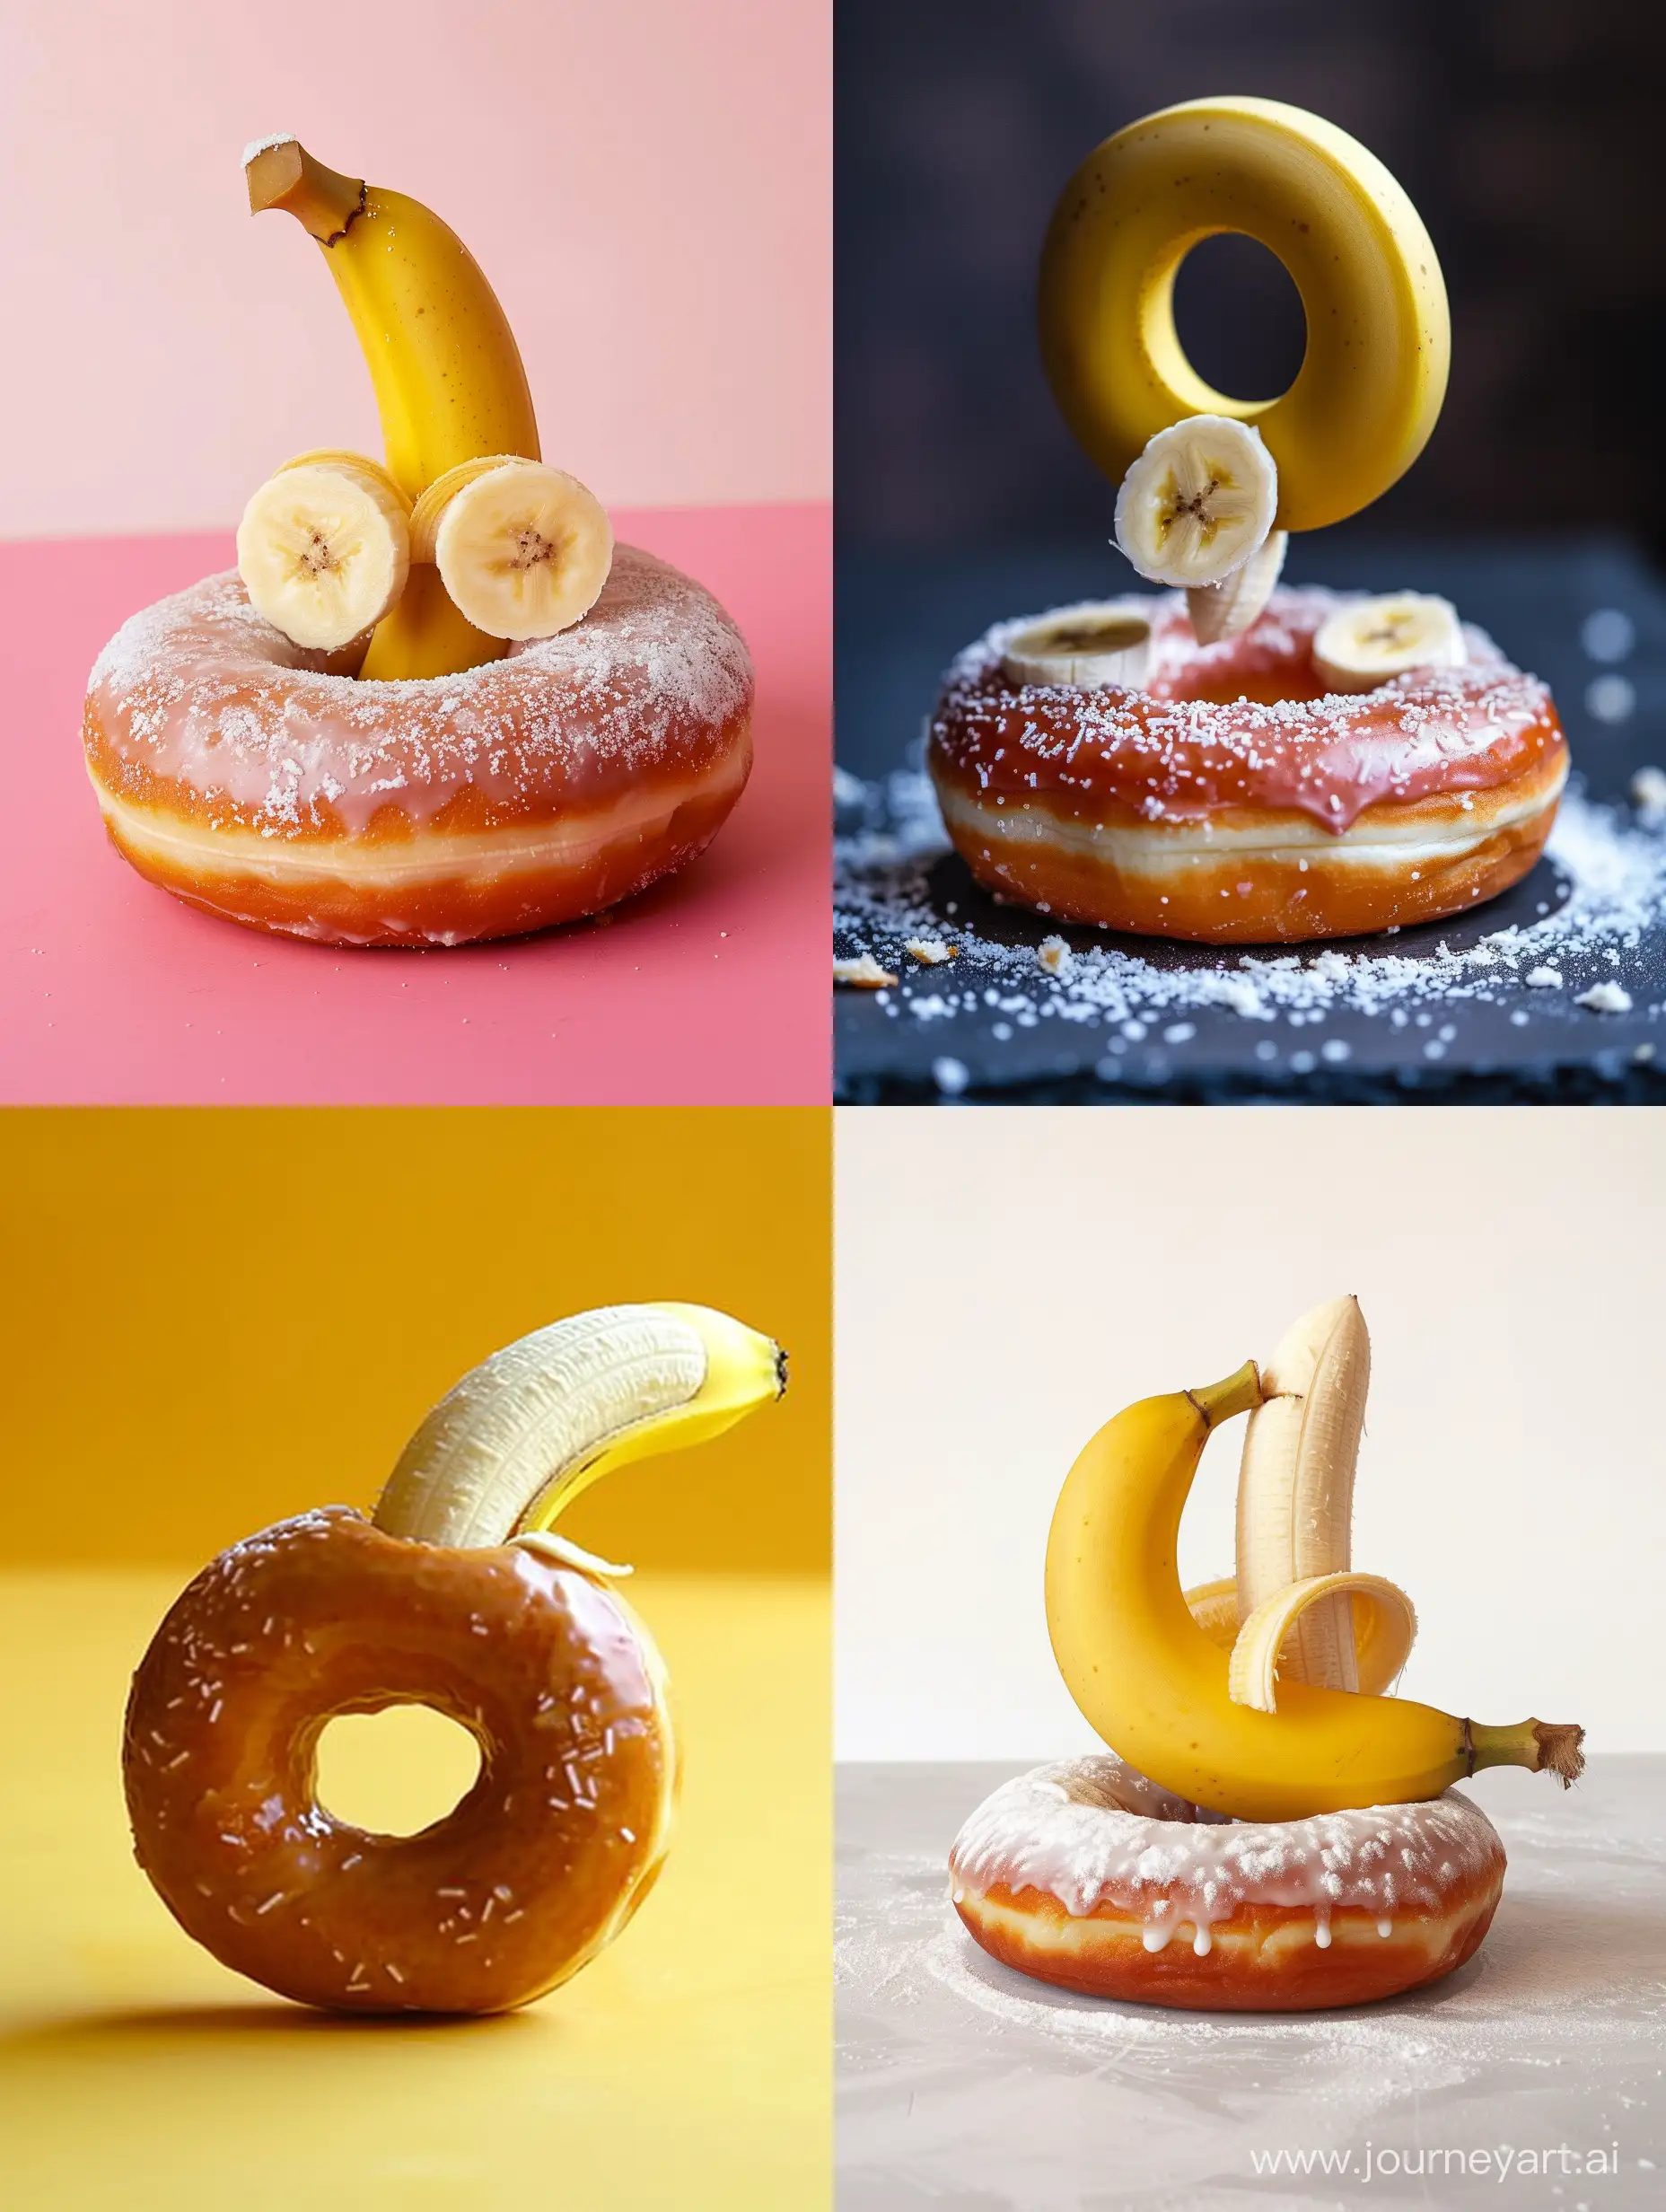 Banana-Piercing-Through-Donut-Vibrant-Fusion-of-Fruits-and-Pastry